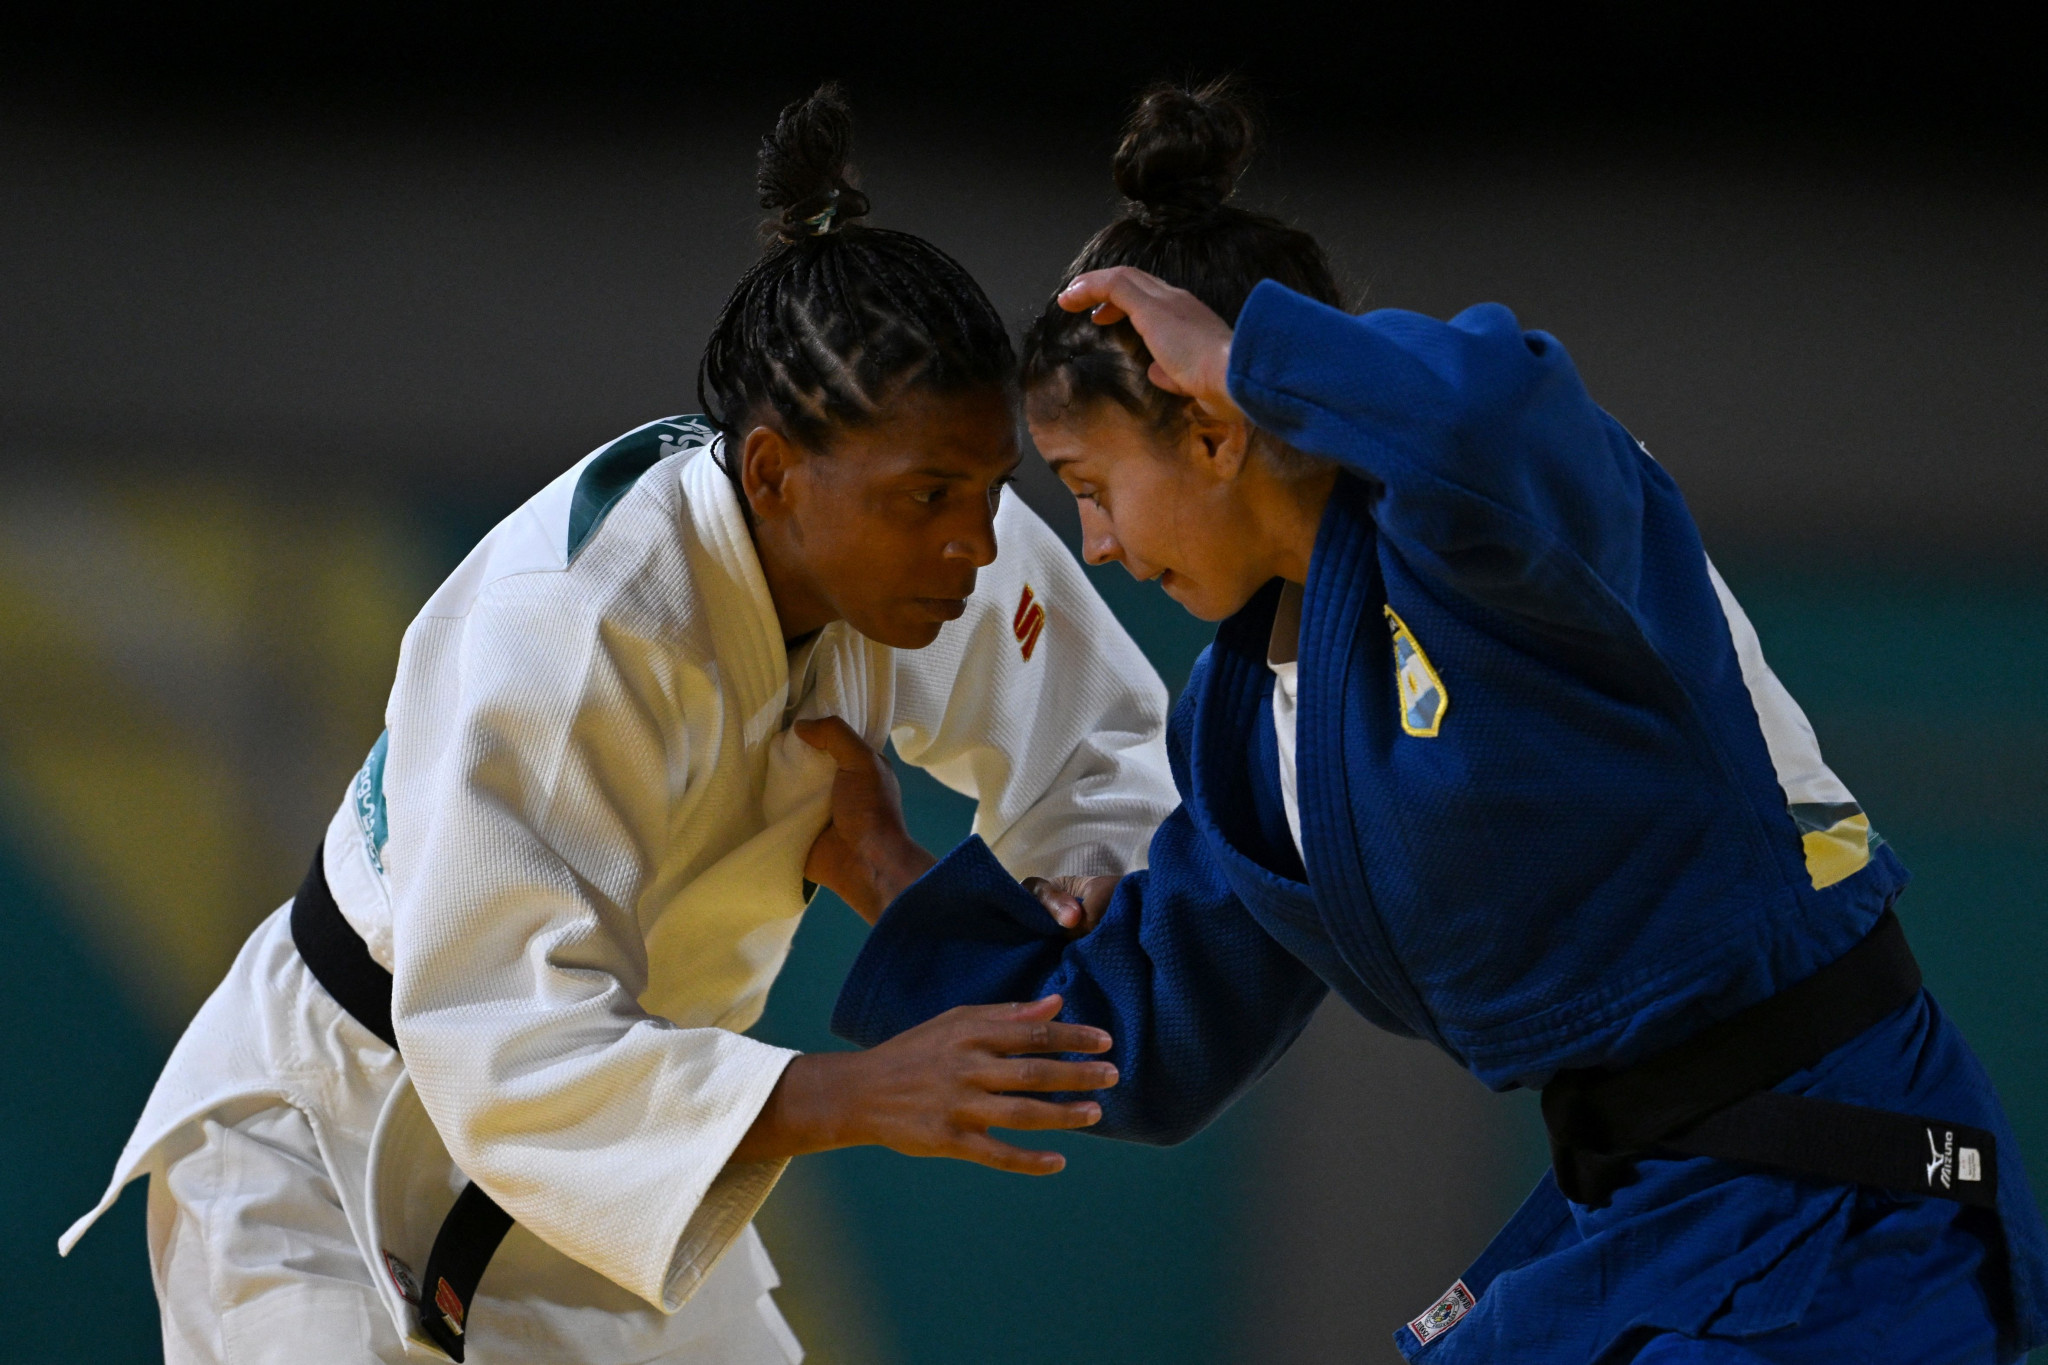 Rafaela Silva of Brazil, left, who was stripped of her gold medal at the last Pan American Games due to a positive doping test, triumphed at Santiago 2023 ©Getty Images
